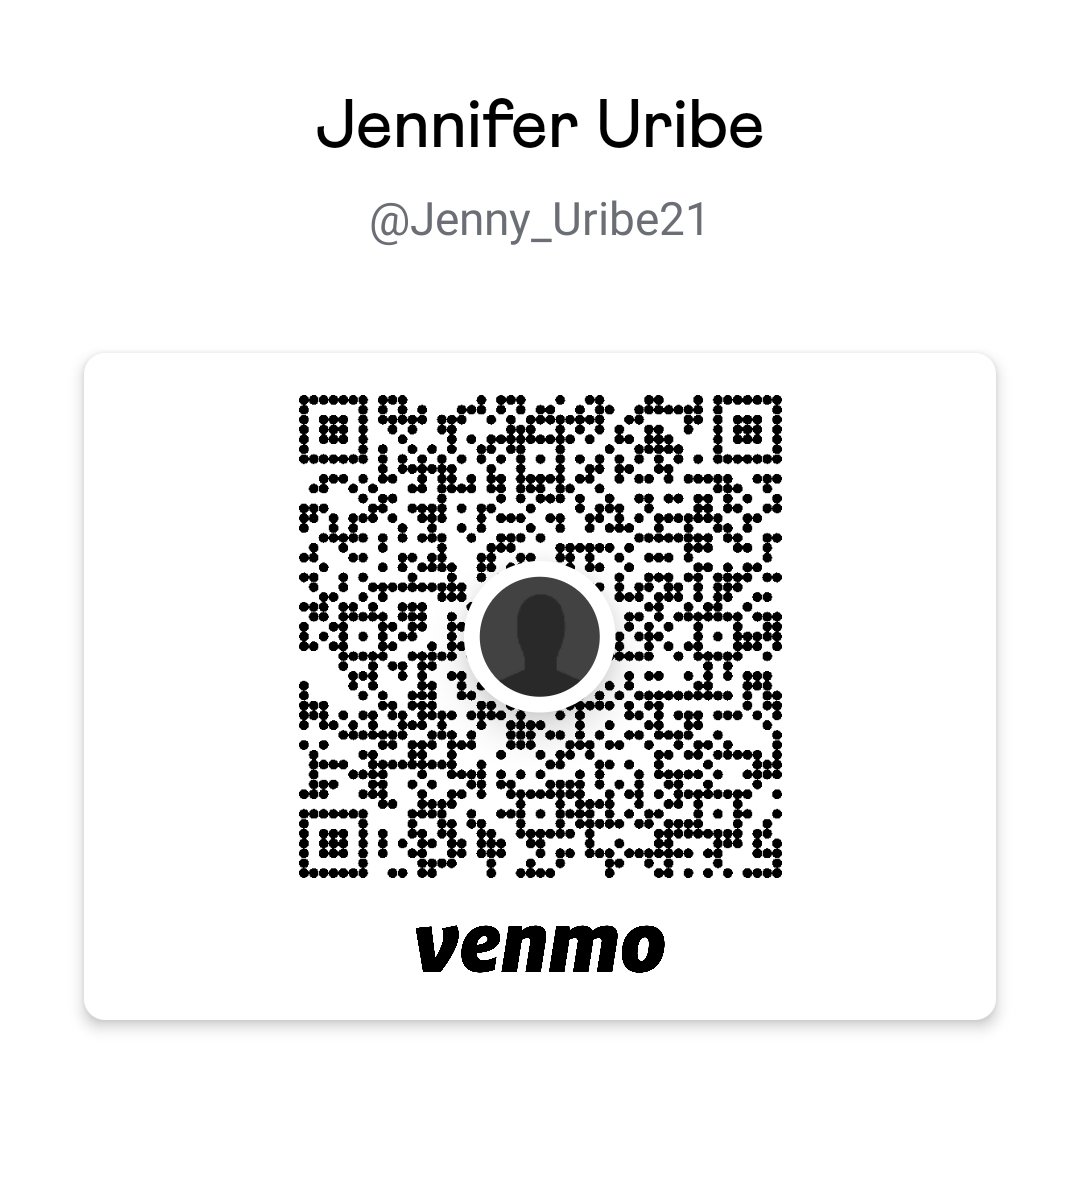 I havent won anything.... so here i go again... my wish is to help buy my parents a new couch since at the moment they dont have one. Thank you #DearVenmo @Jenny_Uribe21 https://t.co/cmbo7EXzsJ @Venmo @chloexhalle https://t.co/gCyP2tFGx8